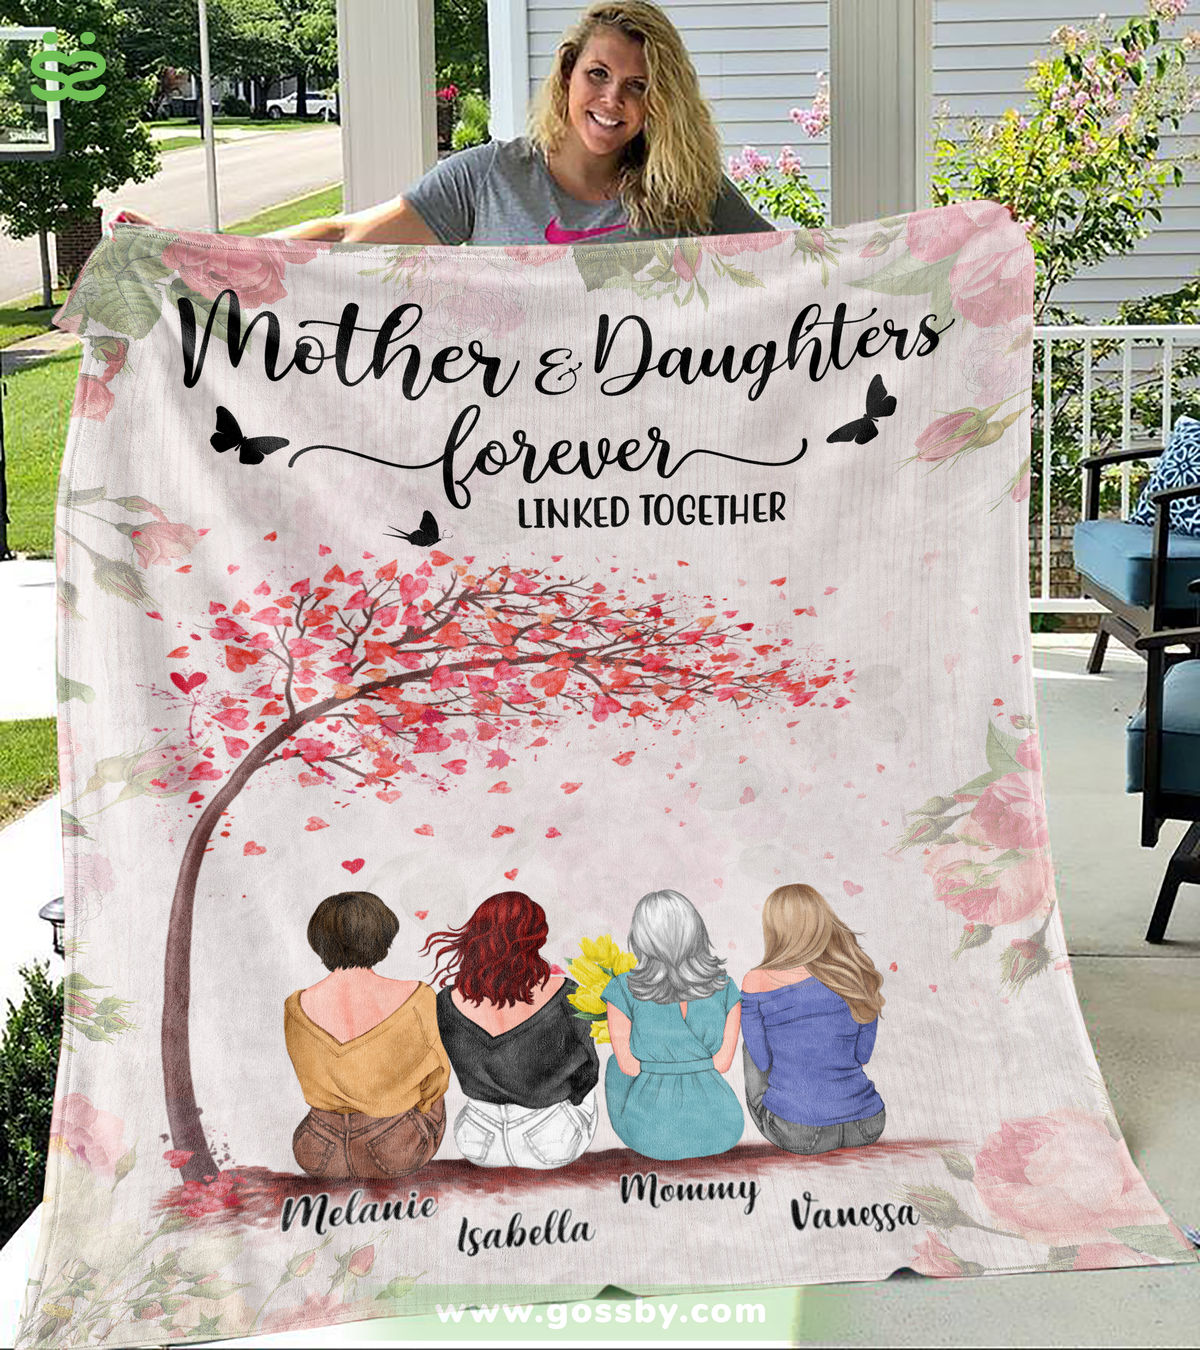 Personalized Fleece Blanket - Mother and Daughter Forever Linked